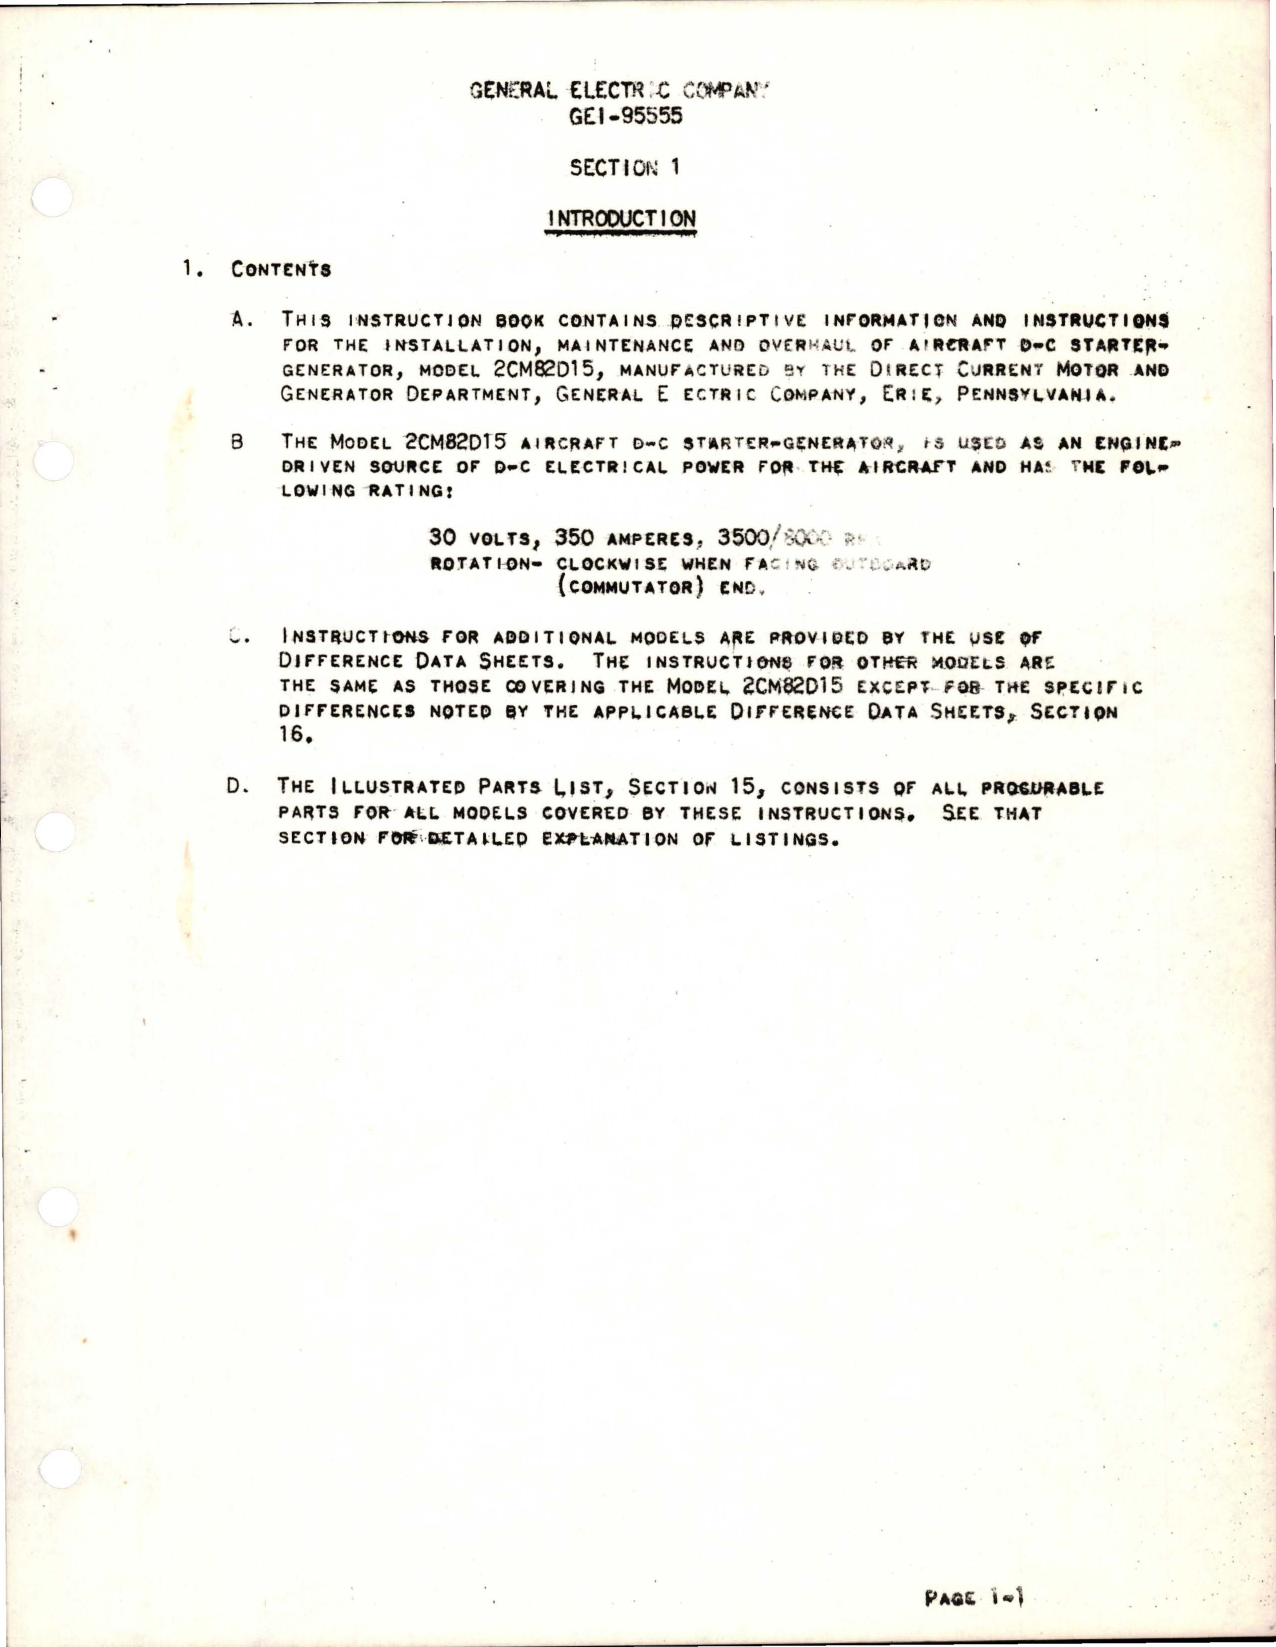 Sample page 7 from AirCorps Library document: Instructions for DC Starter Generator - Models 2CM82D15 and 2CM82F3 